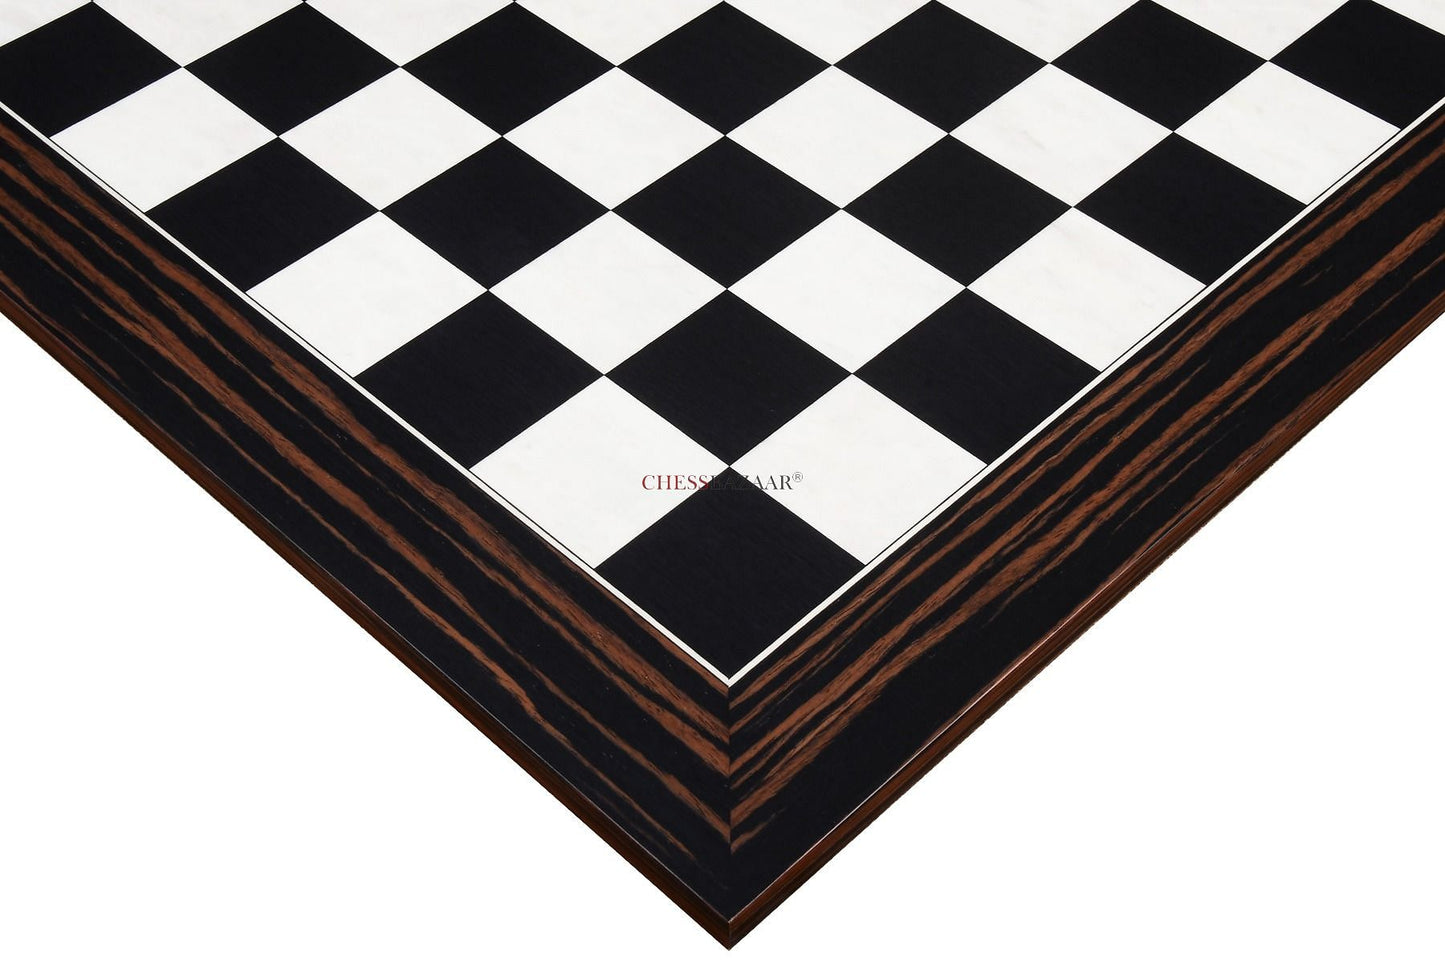 Deluxe Black Dyed Poplar & White Erable with Matte Finish Chess Board 22" - 55 mm